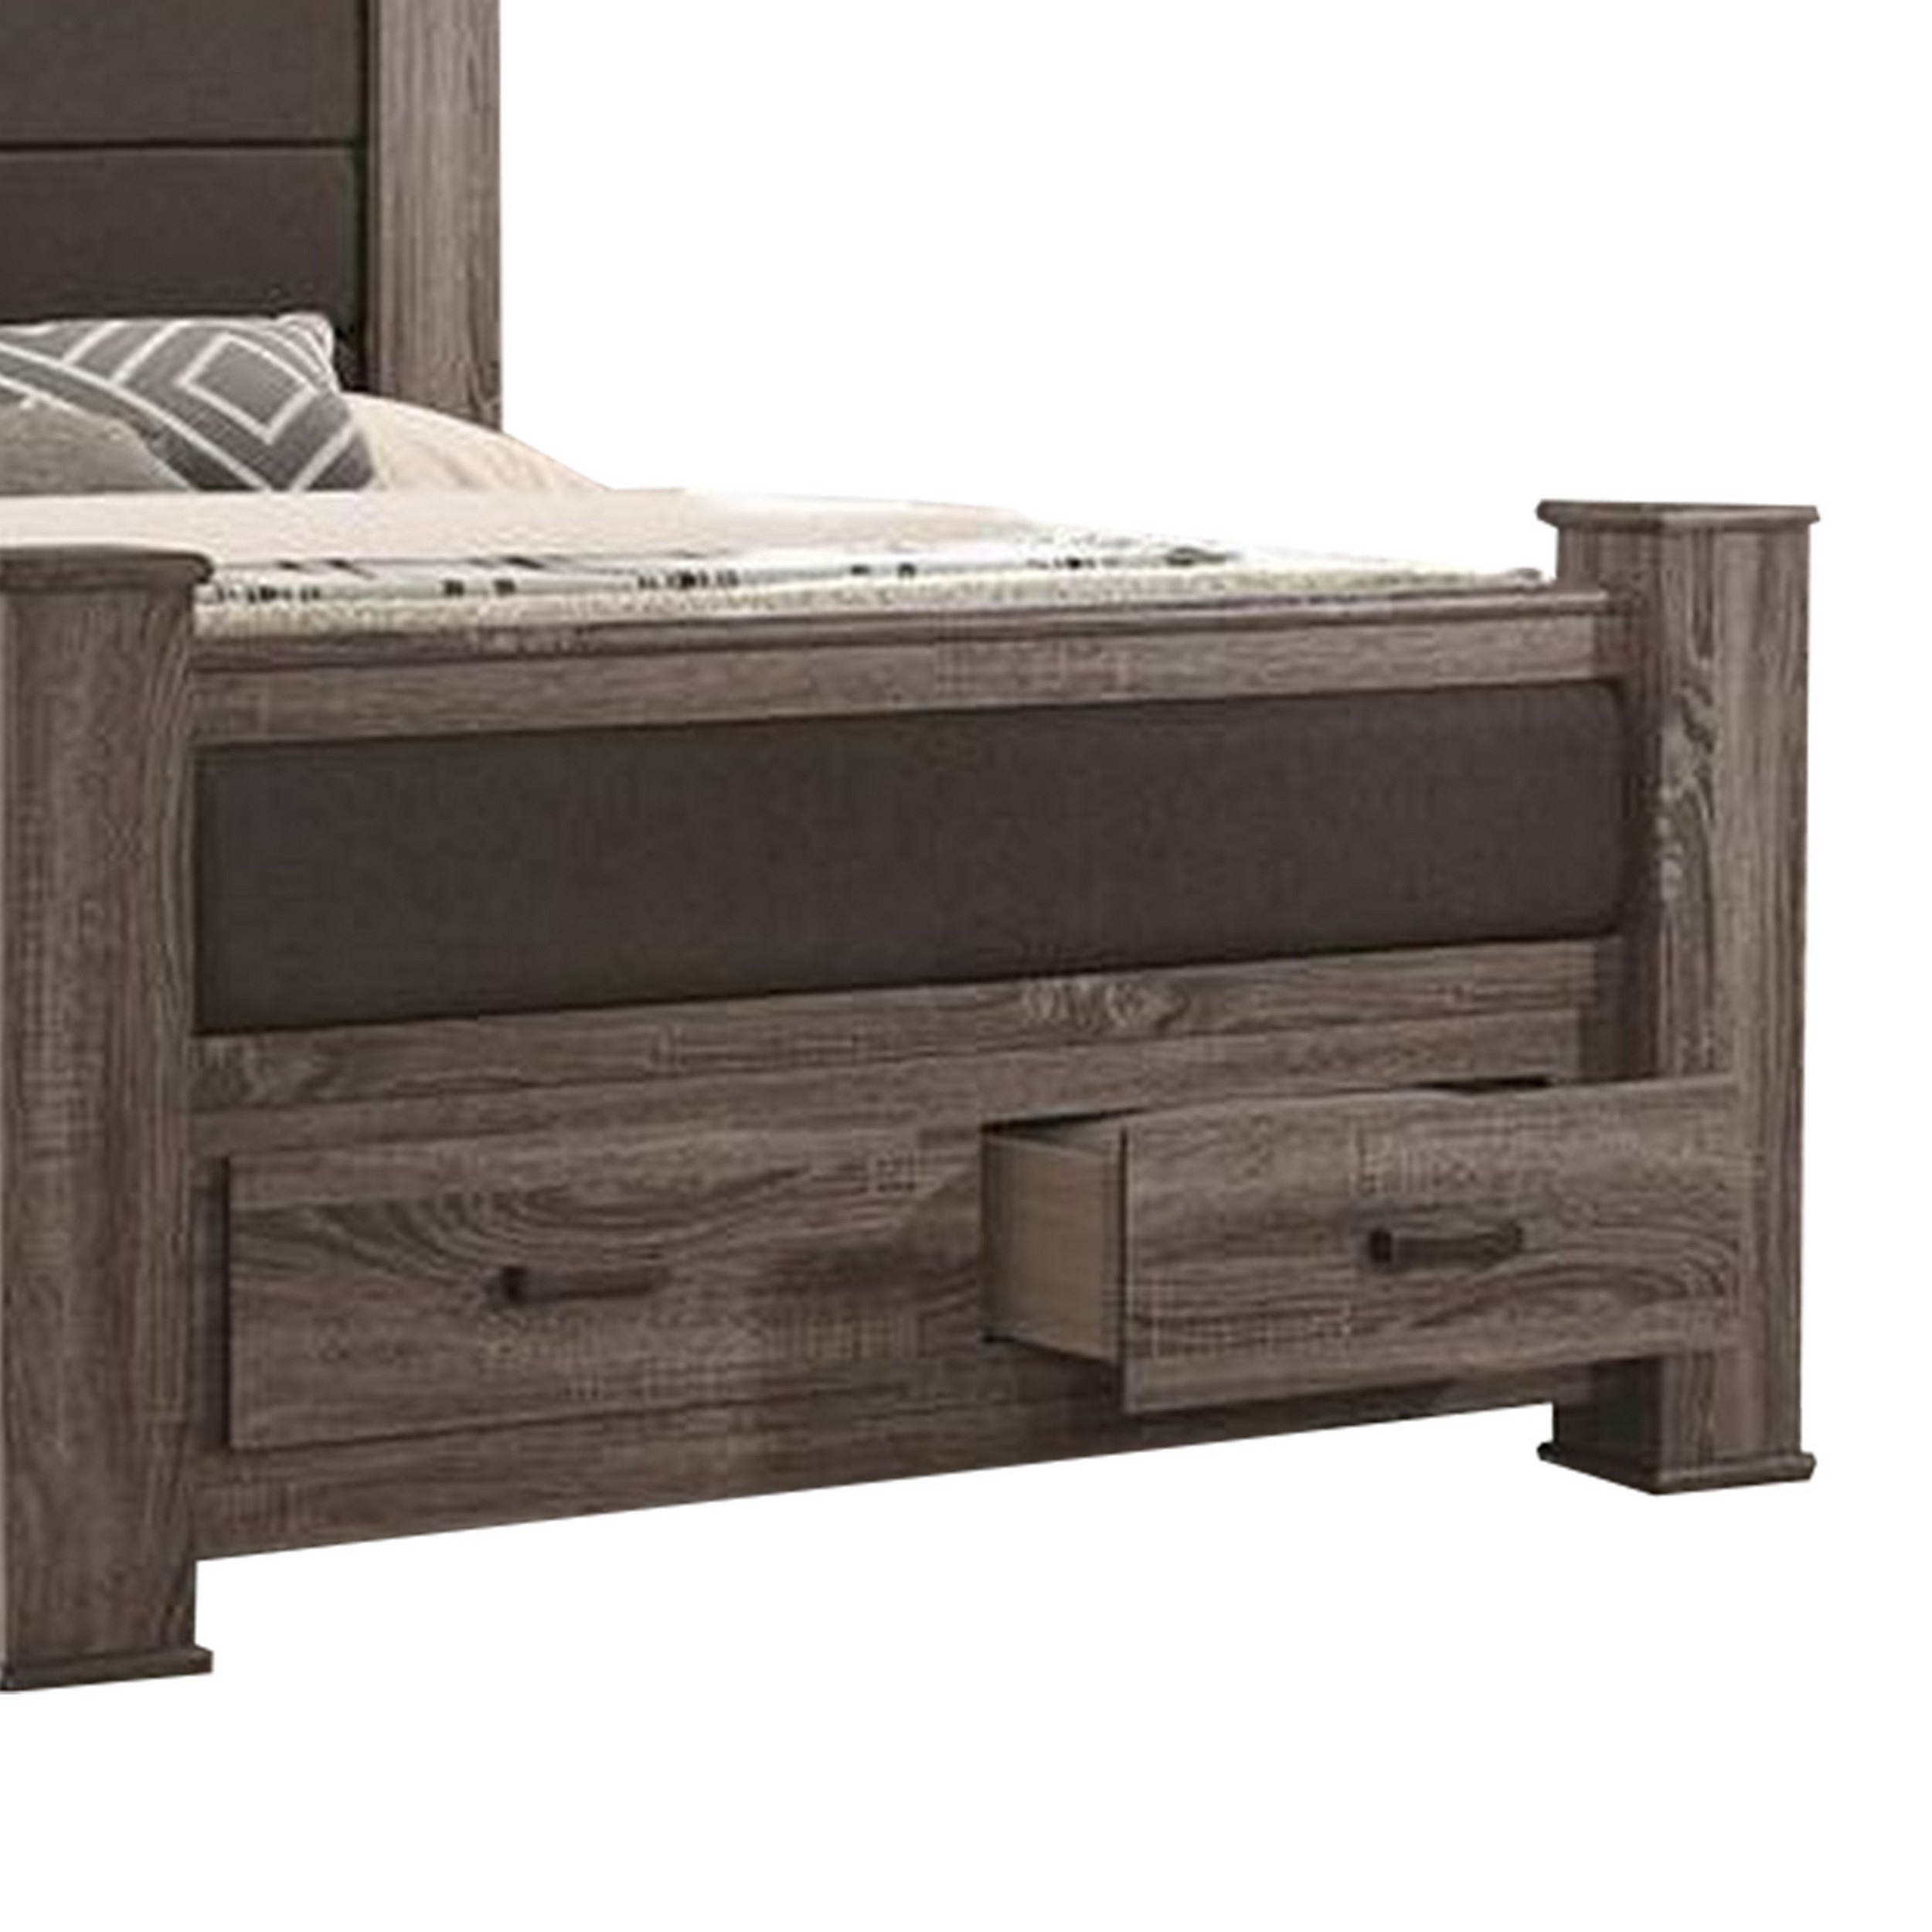 Fort Classic Wood King Size Bed With 2 Drawers, Upholstered Panel, Oak Gray- Saltoro Sherpi